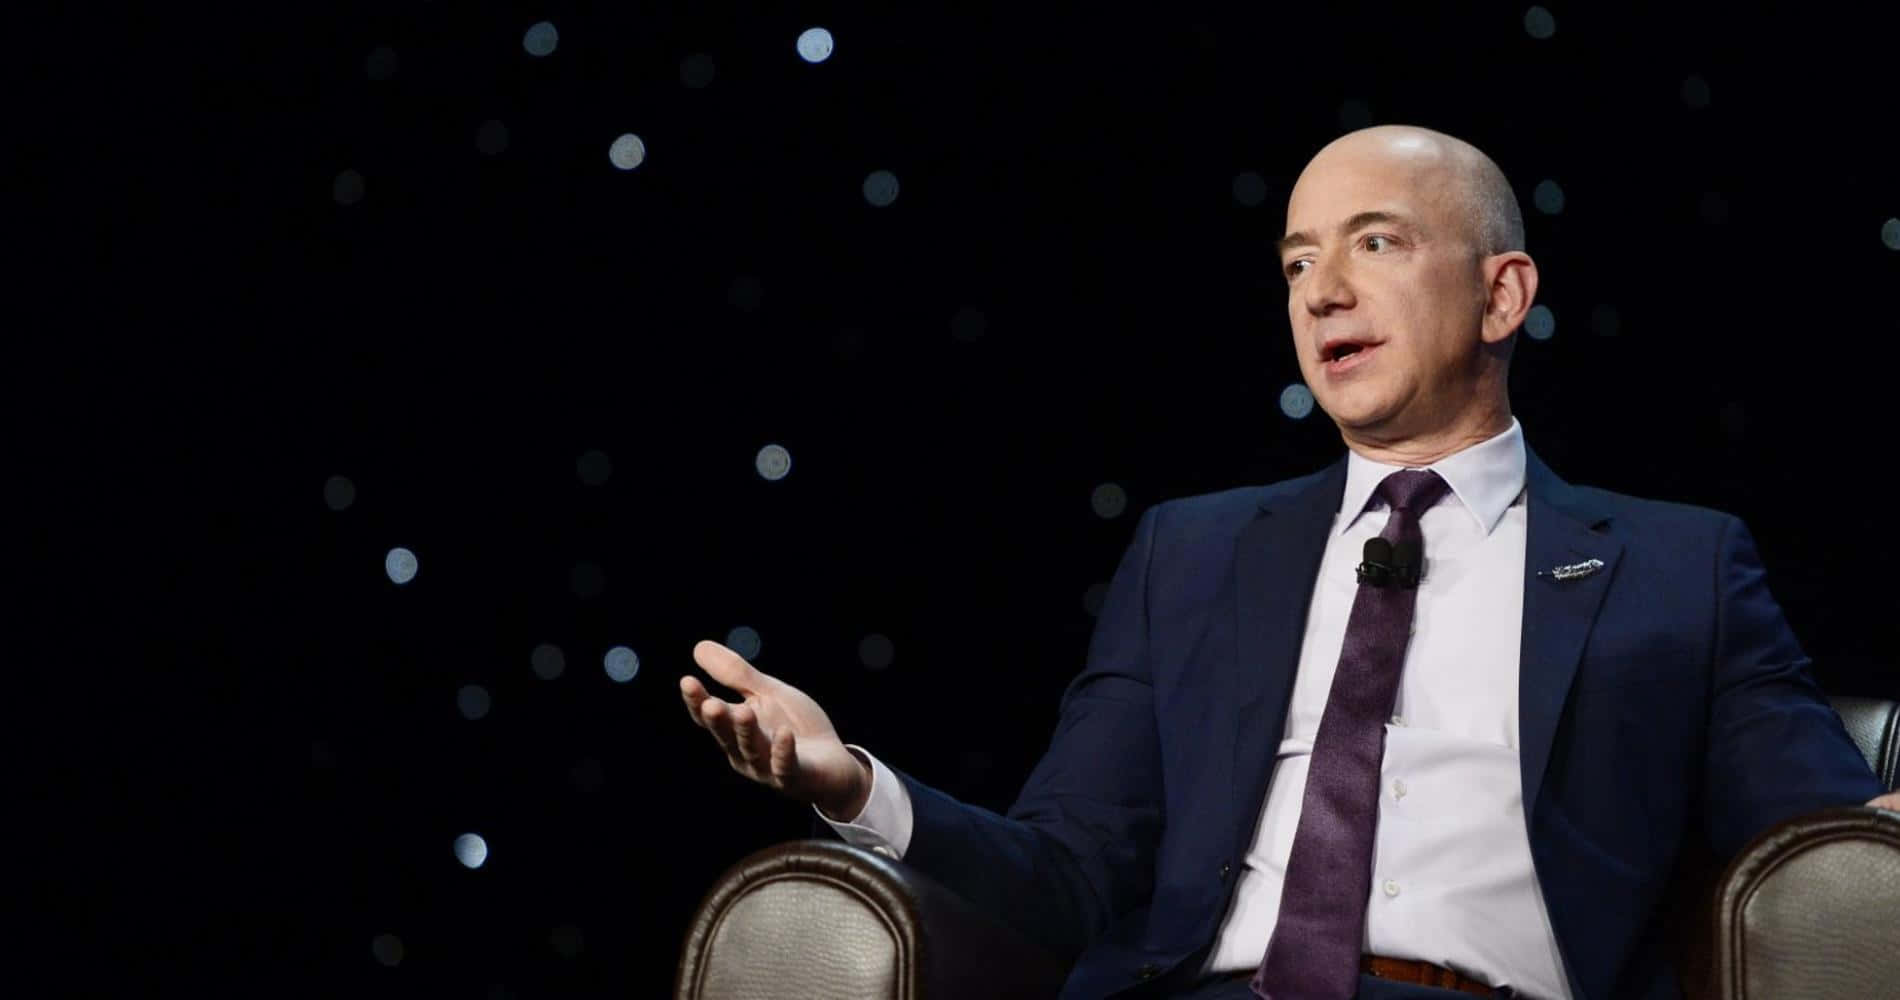 Jeff Bezos, Founder and Former CEO of Amazon